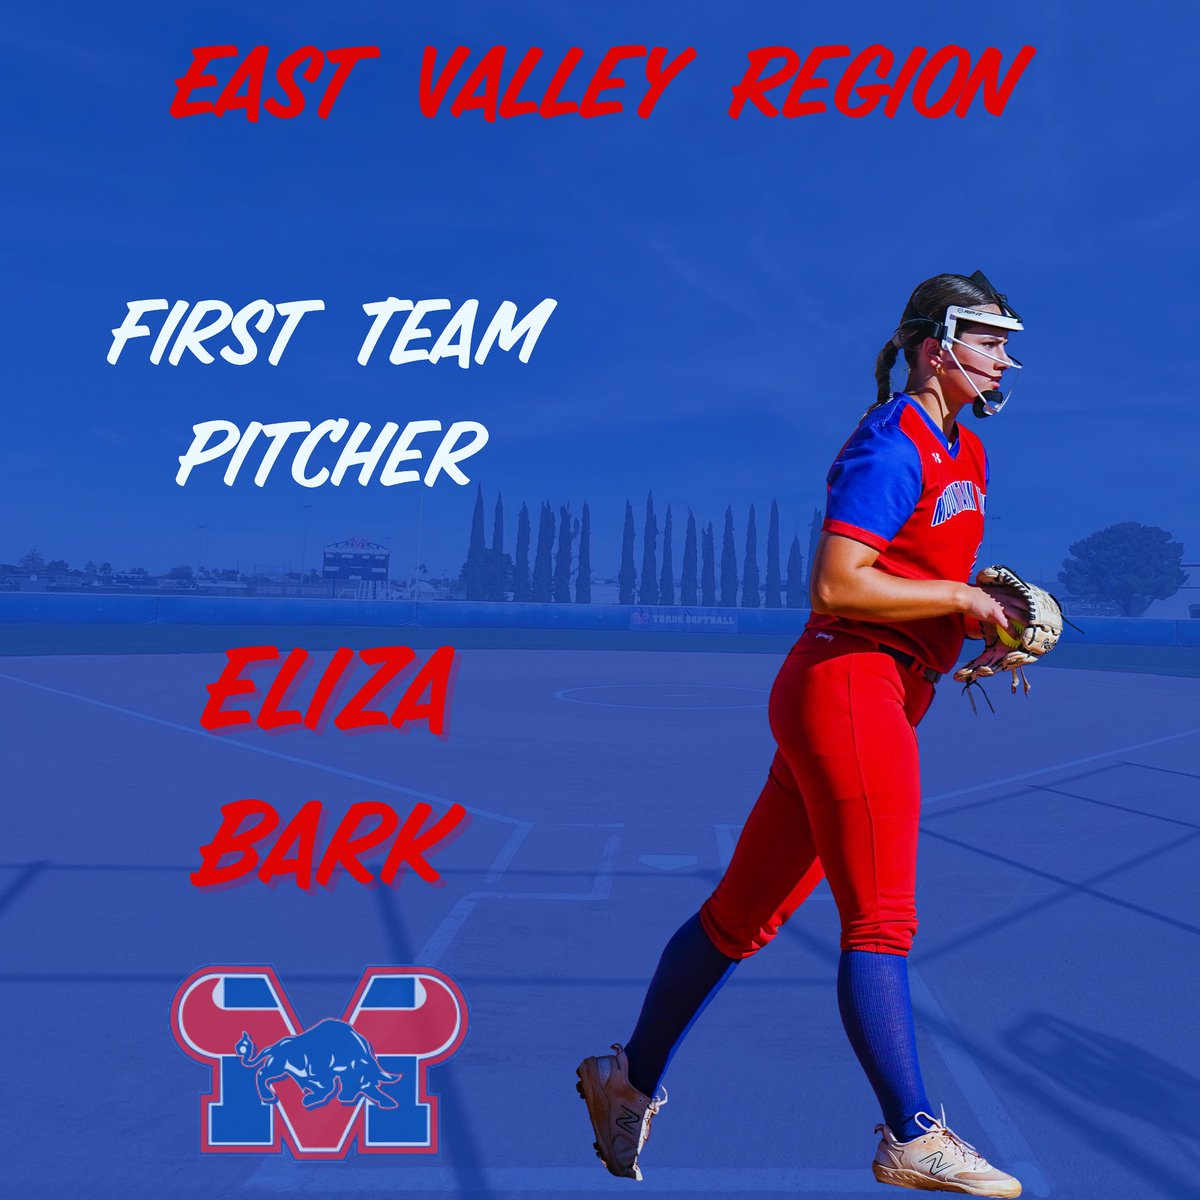 Senior Eliza Bark is awarded First Team Pitcher for East Valley Region. Congratulations on a great season Eliza!